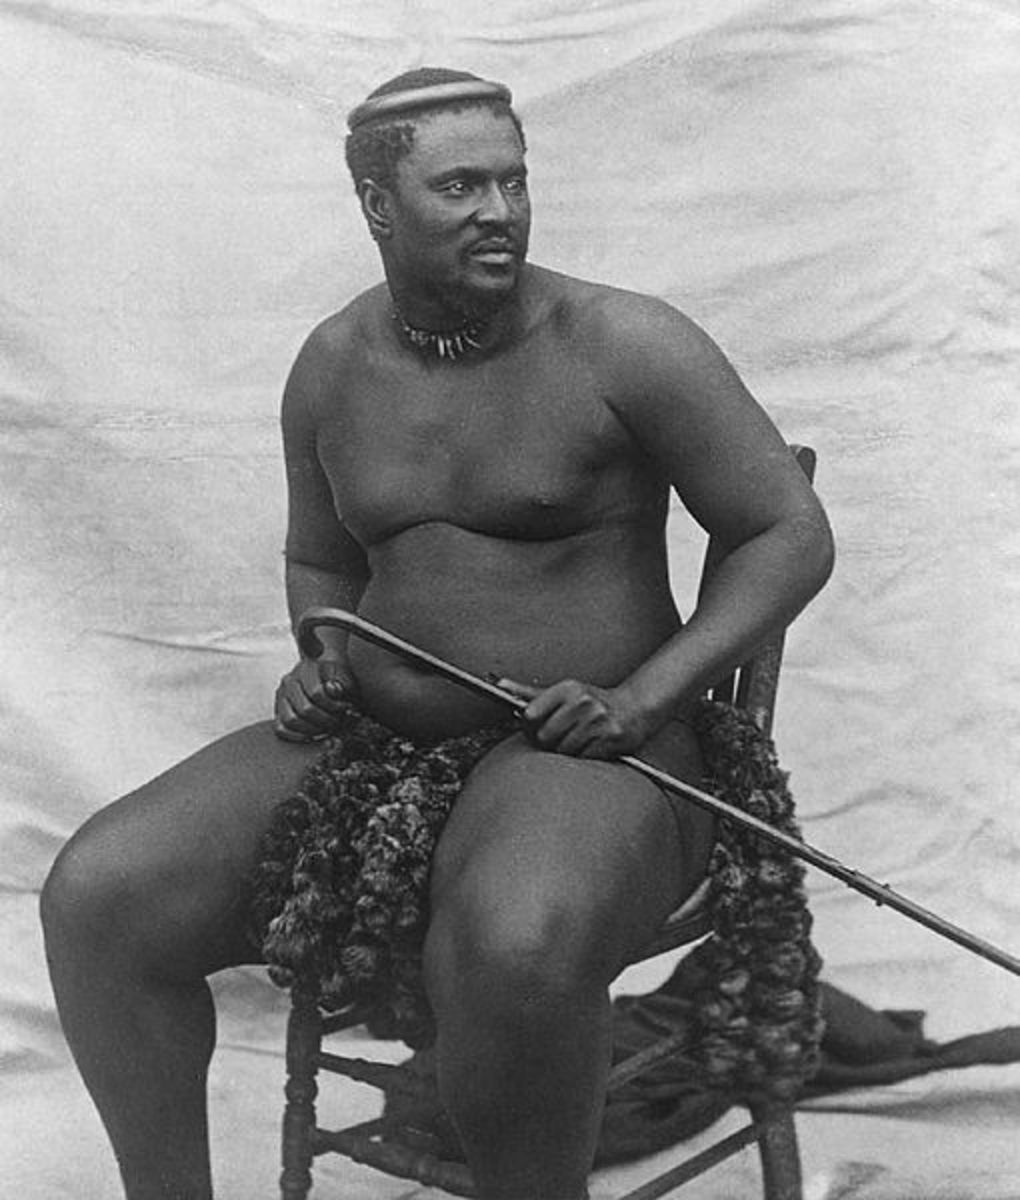 A photograph of Cetshwayo taken around 1875, four years prior to his famous victory at Isandhlwana.